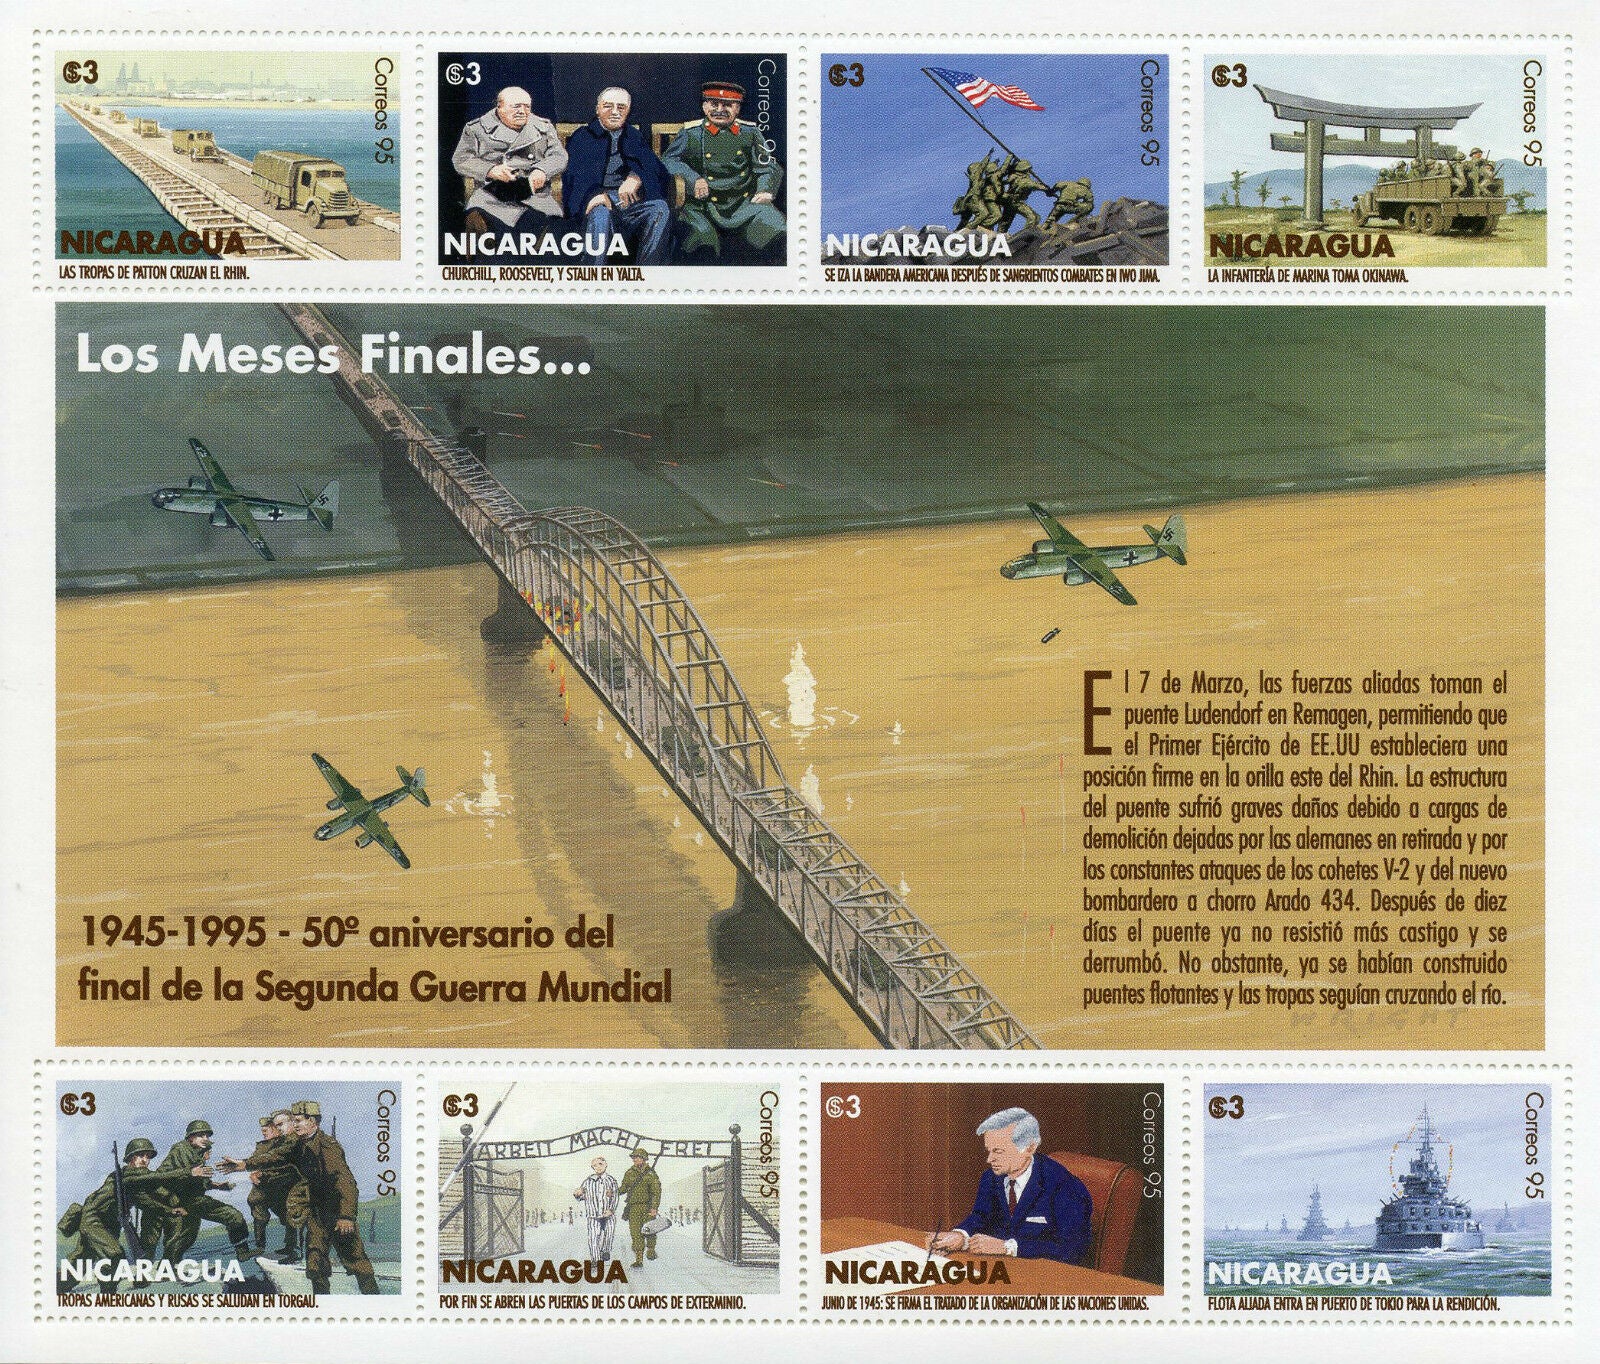 Nicaragua 1995 MNH Military Stamps WWII WW2 VE Day World War II Churchill Stalin 8v M/S